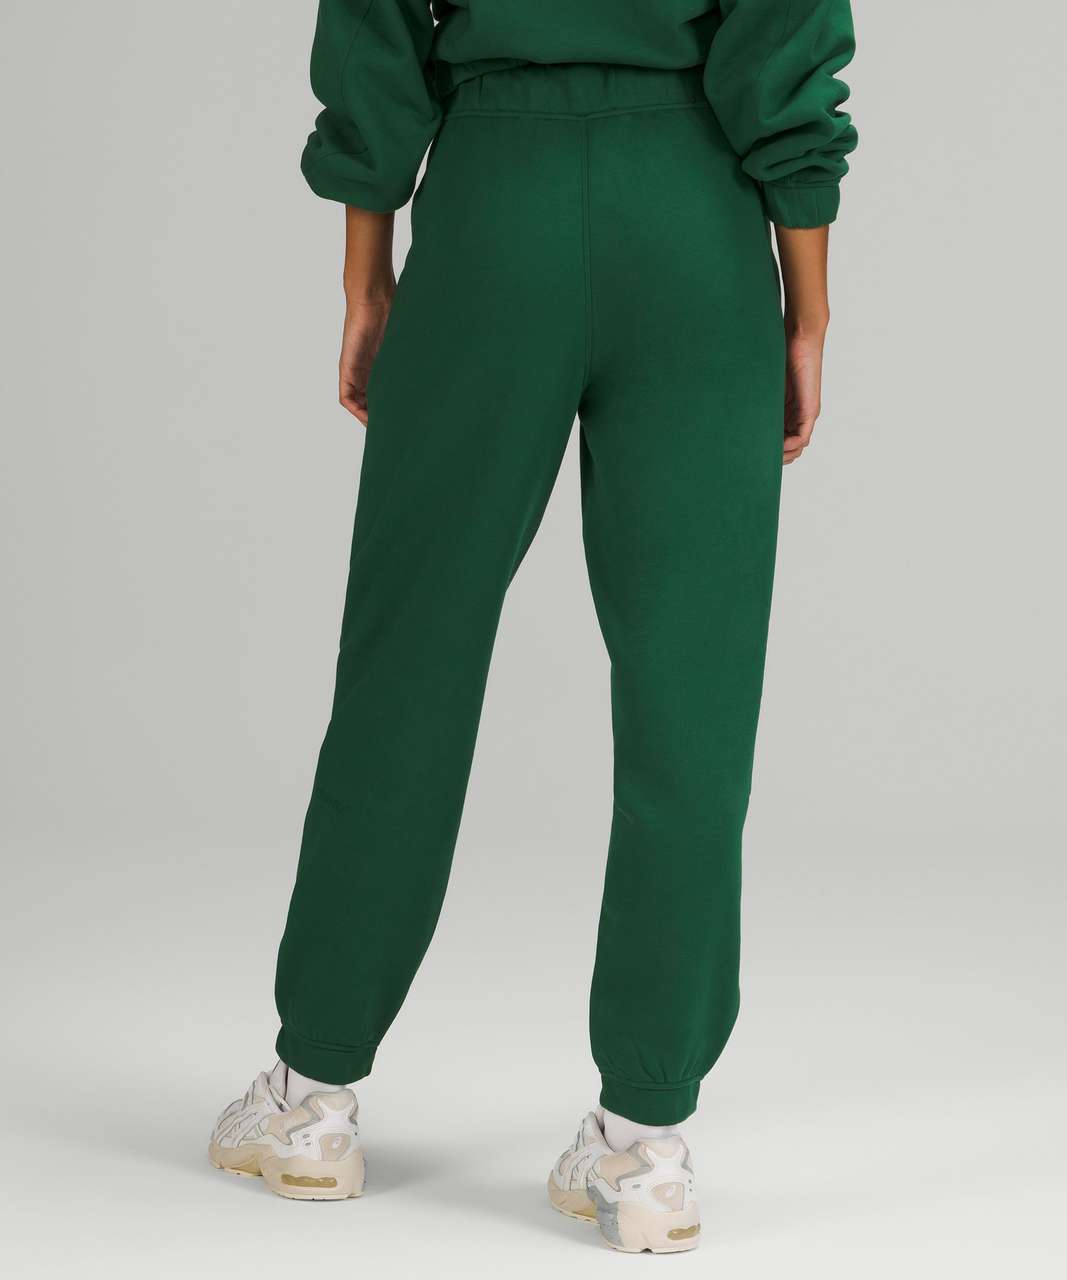 Women's Plus Size Mid-Rise Fleece Joggers - All in Motion™ Emerald Green 2X  - ShopStyle